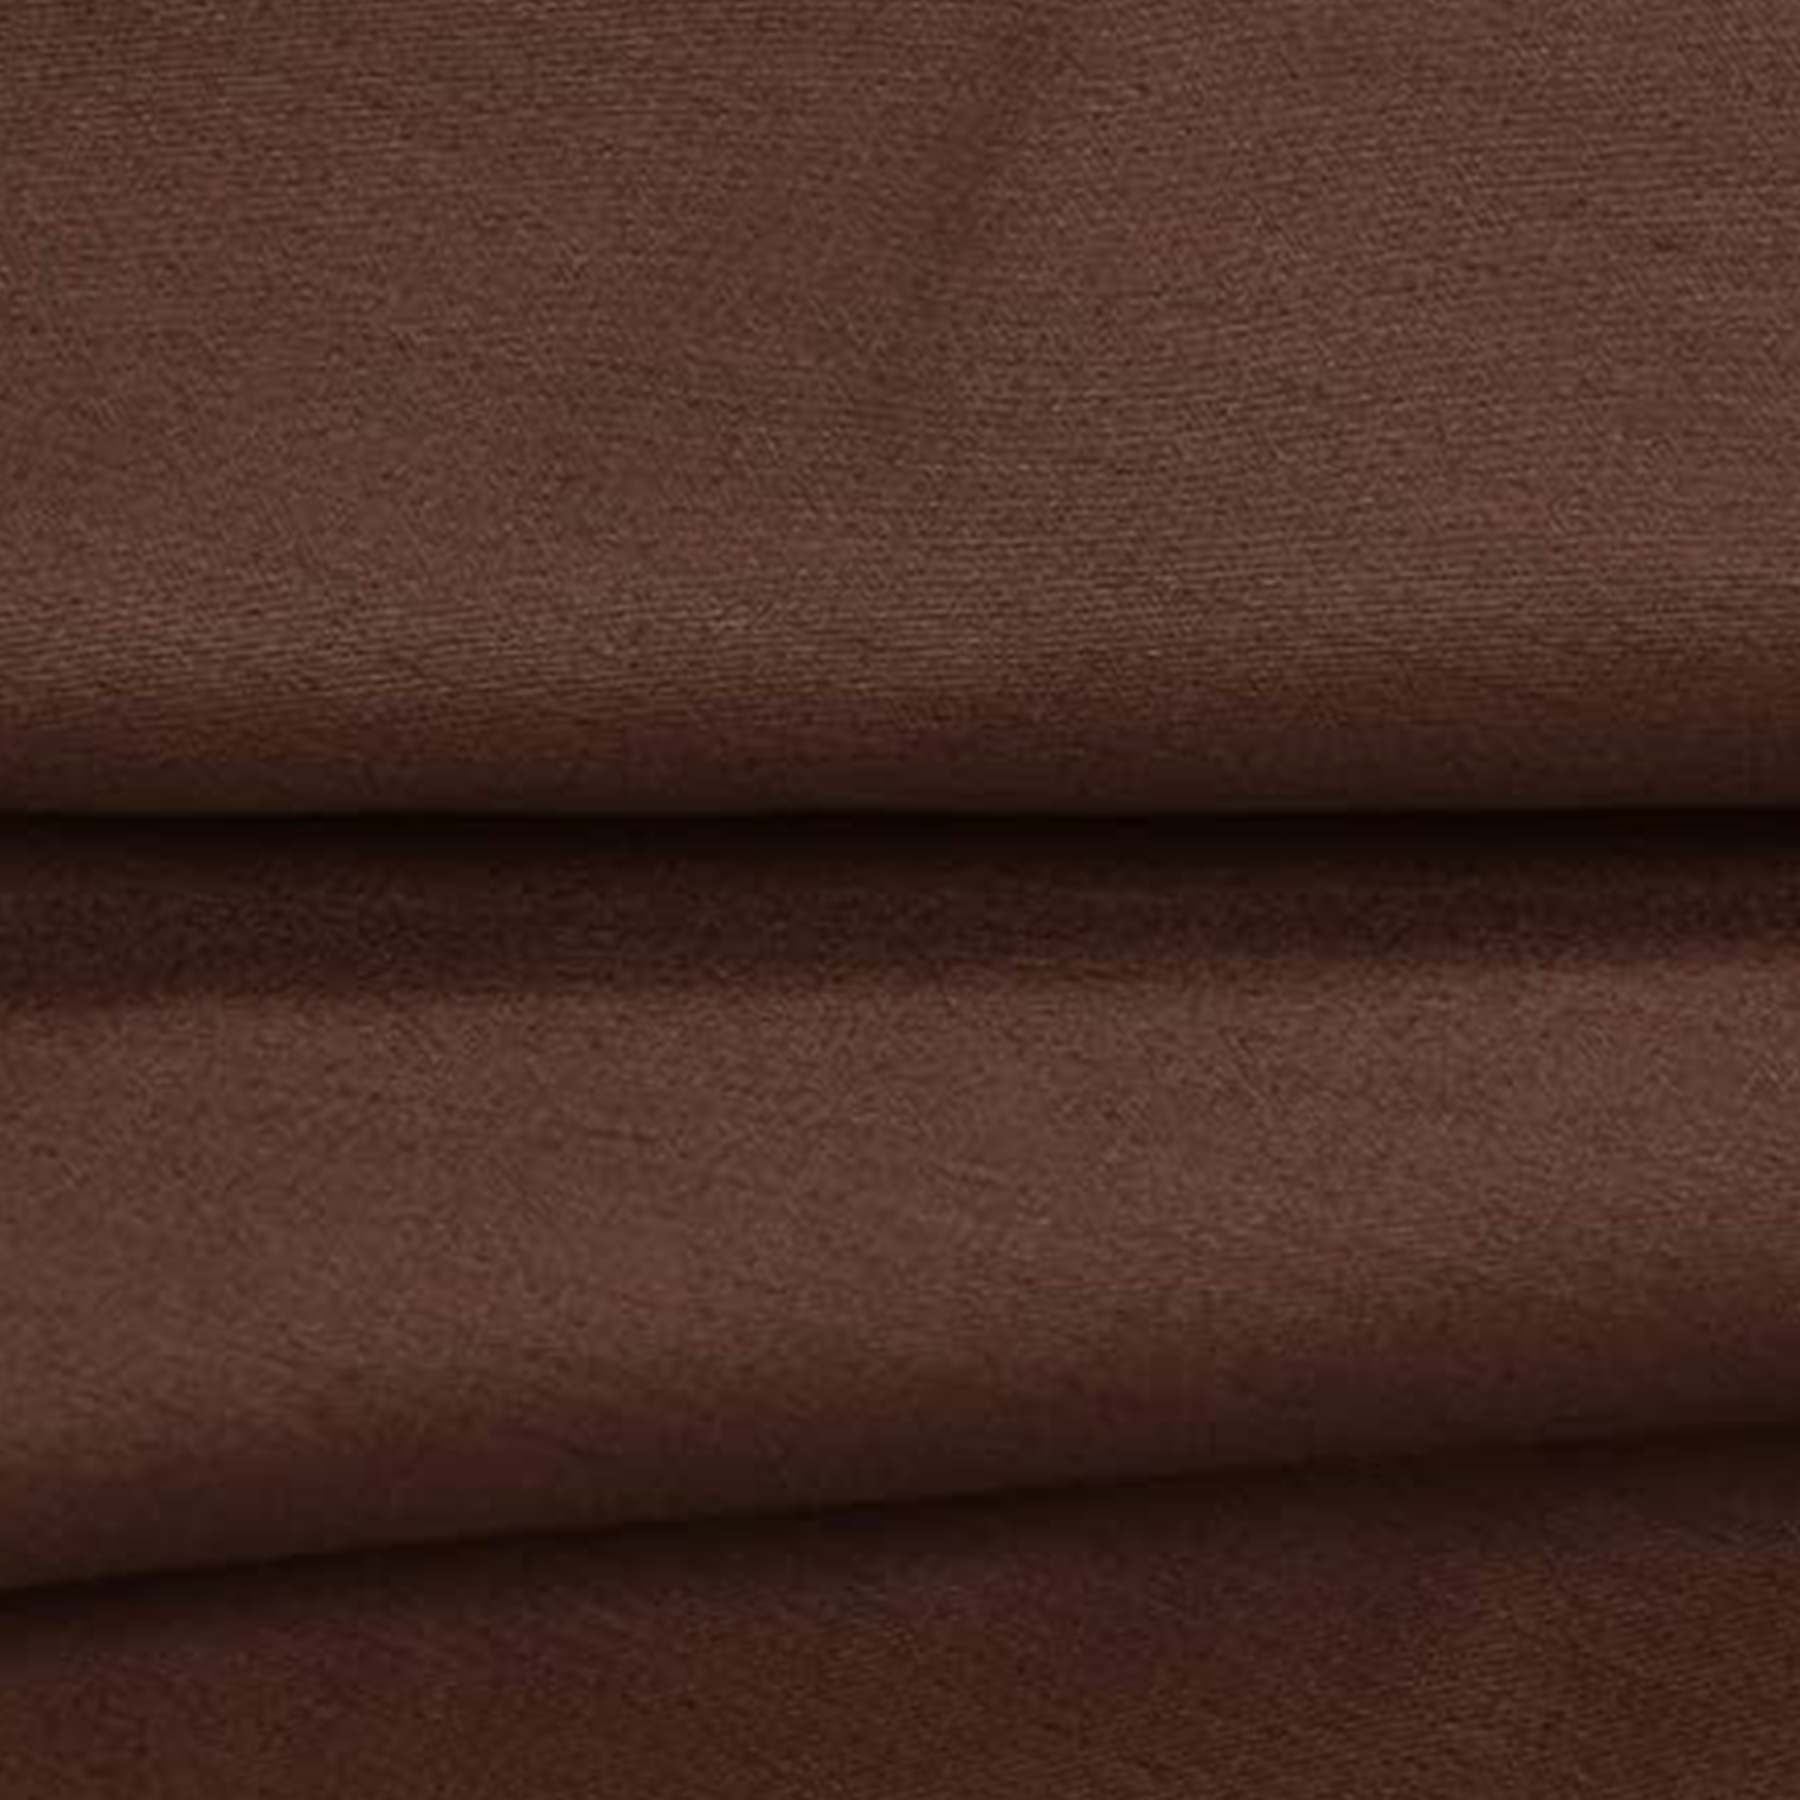 THE LUXELIFE SOLID BROWN COTTON BEDSHEET